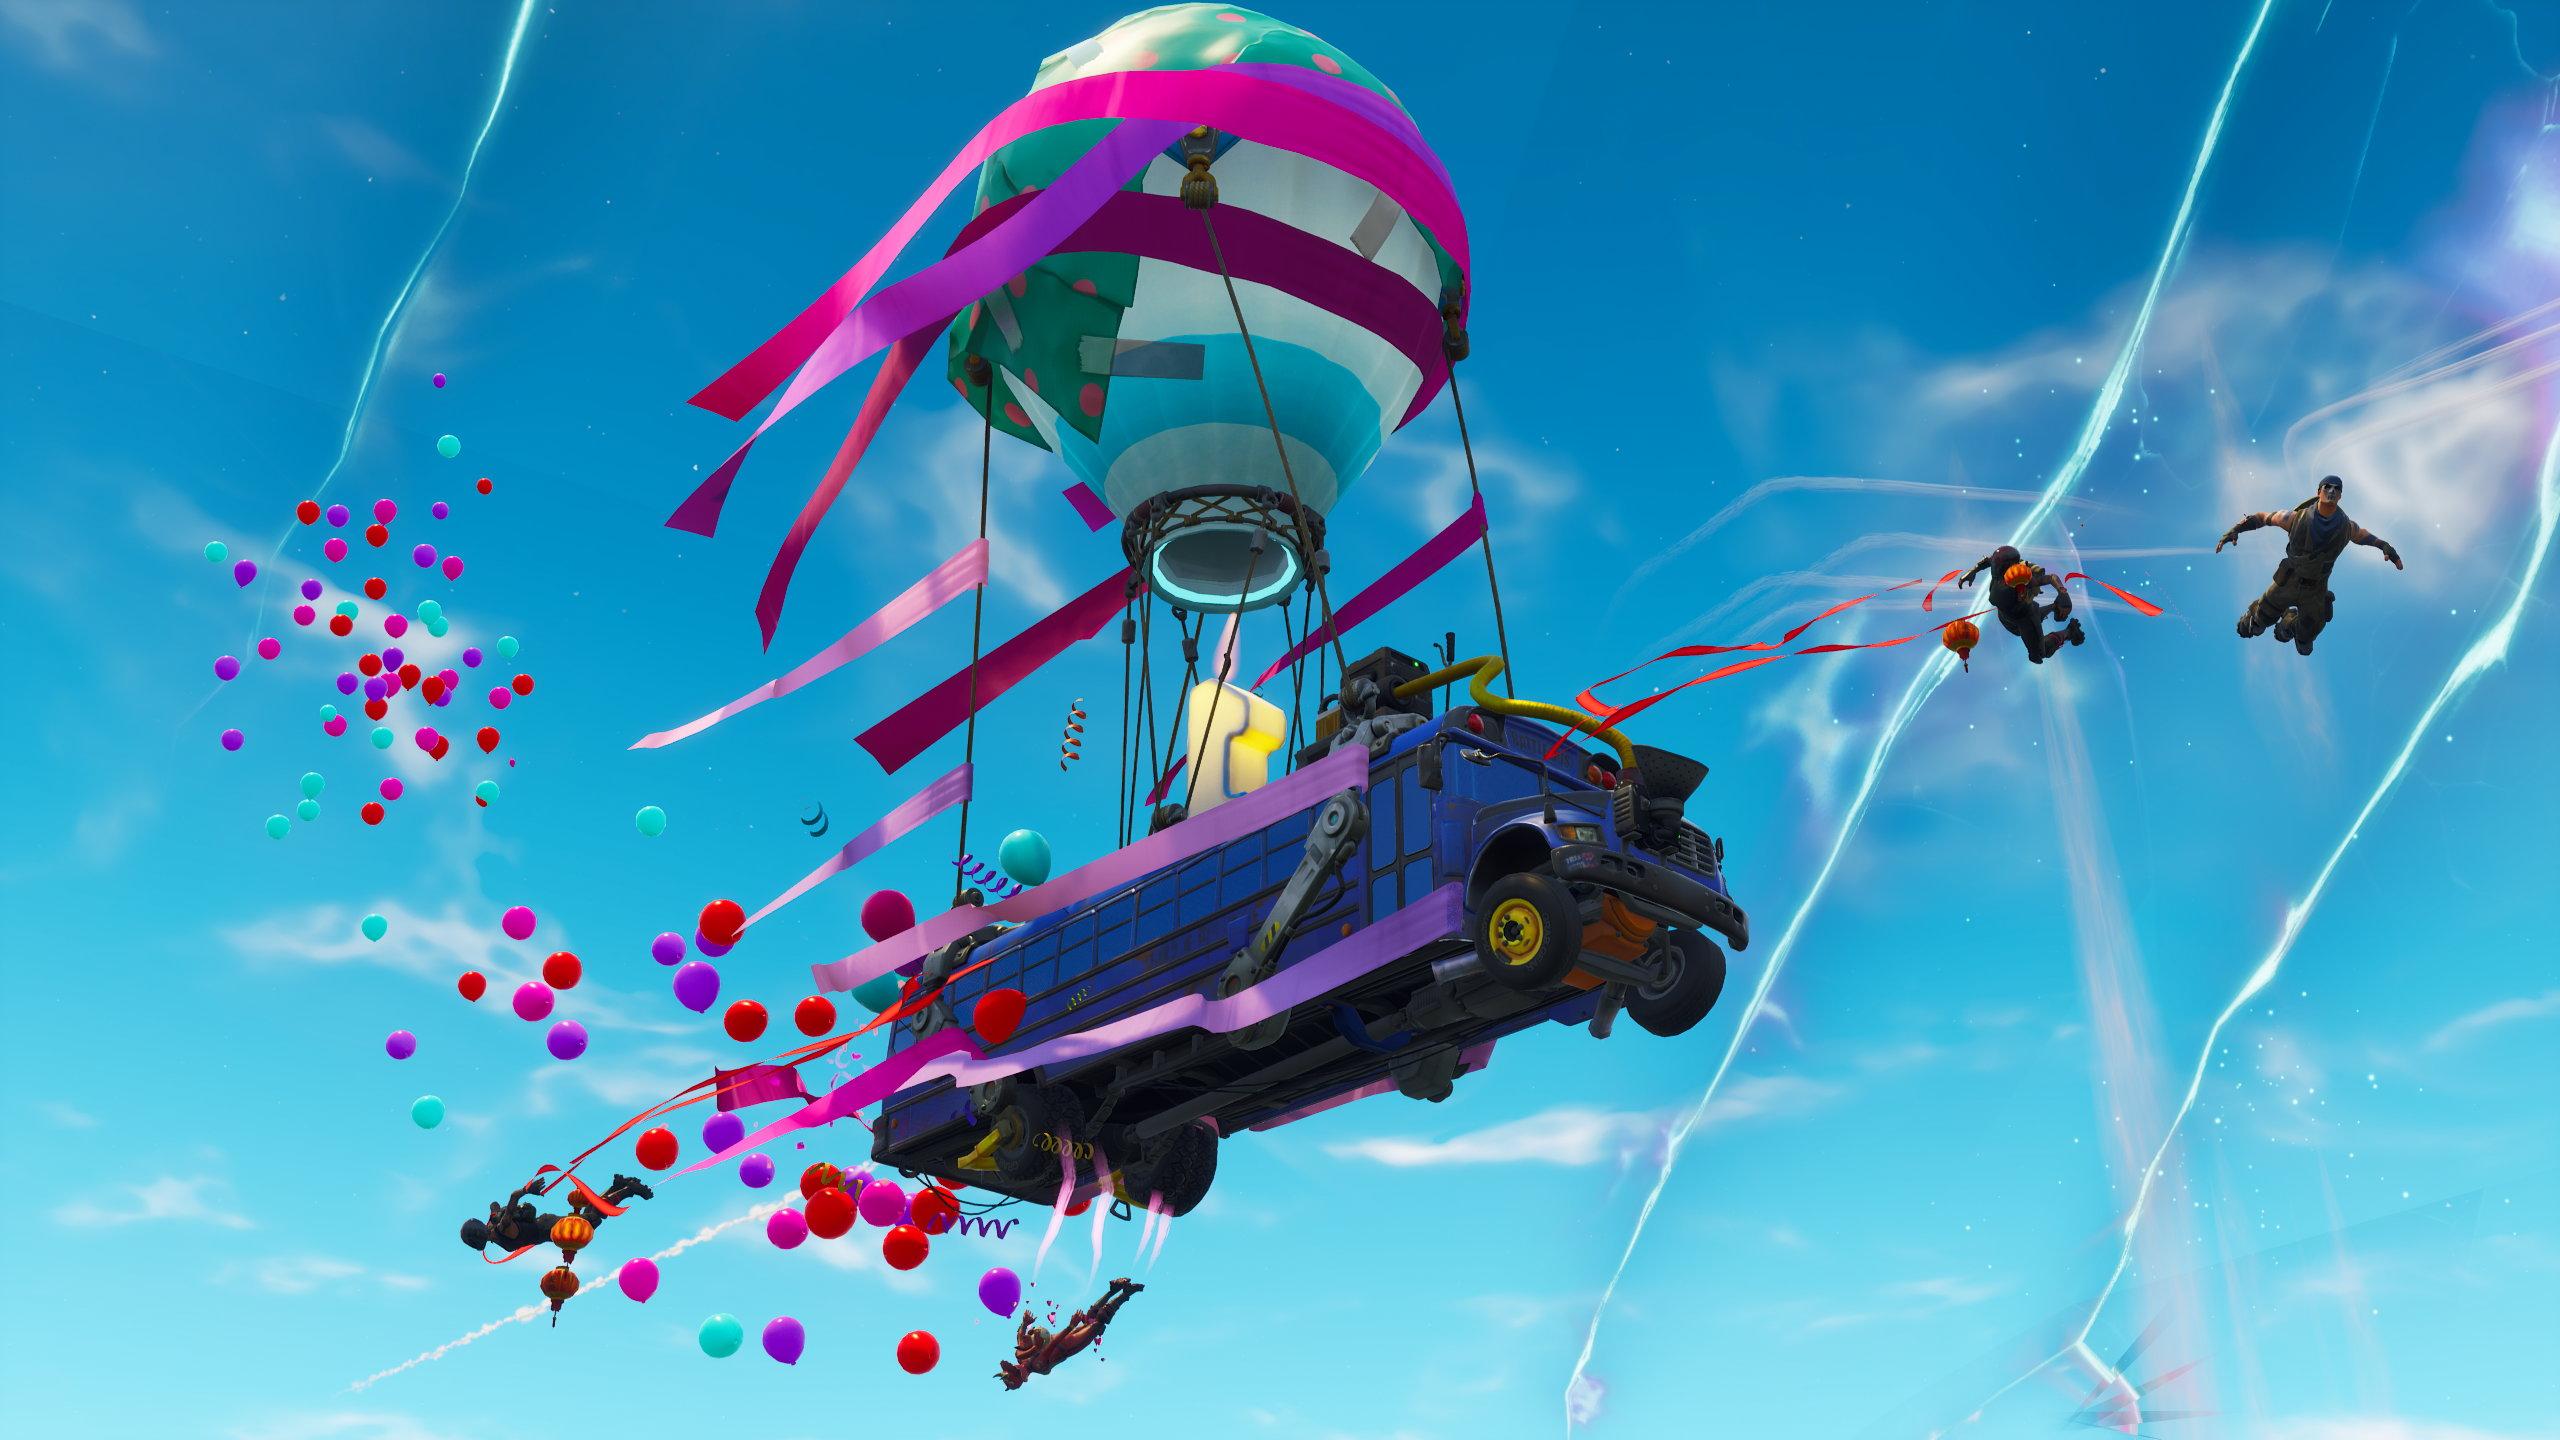 Battle Bus customization coming to Fortnite